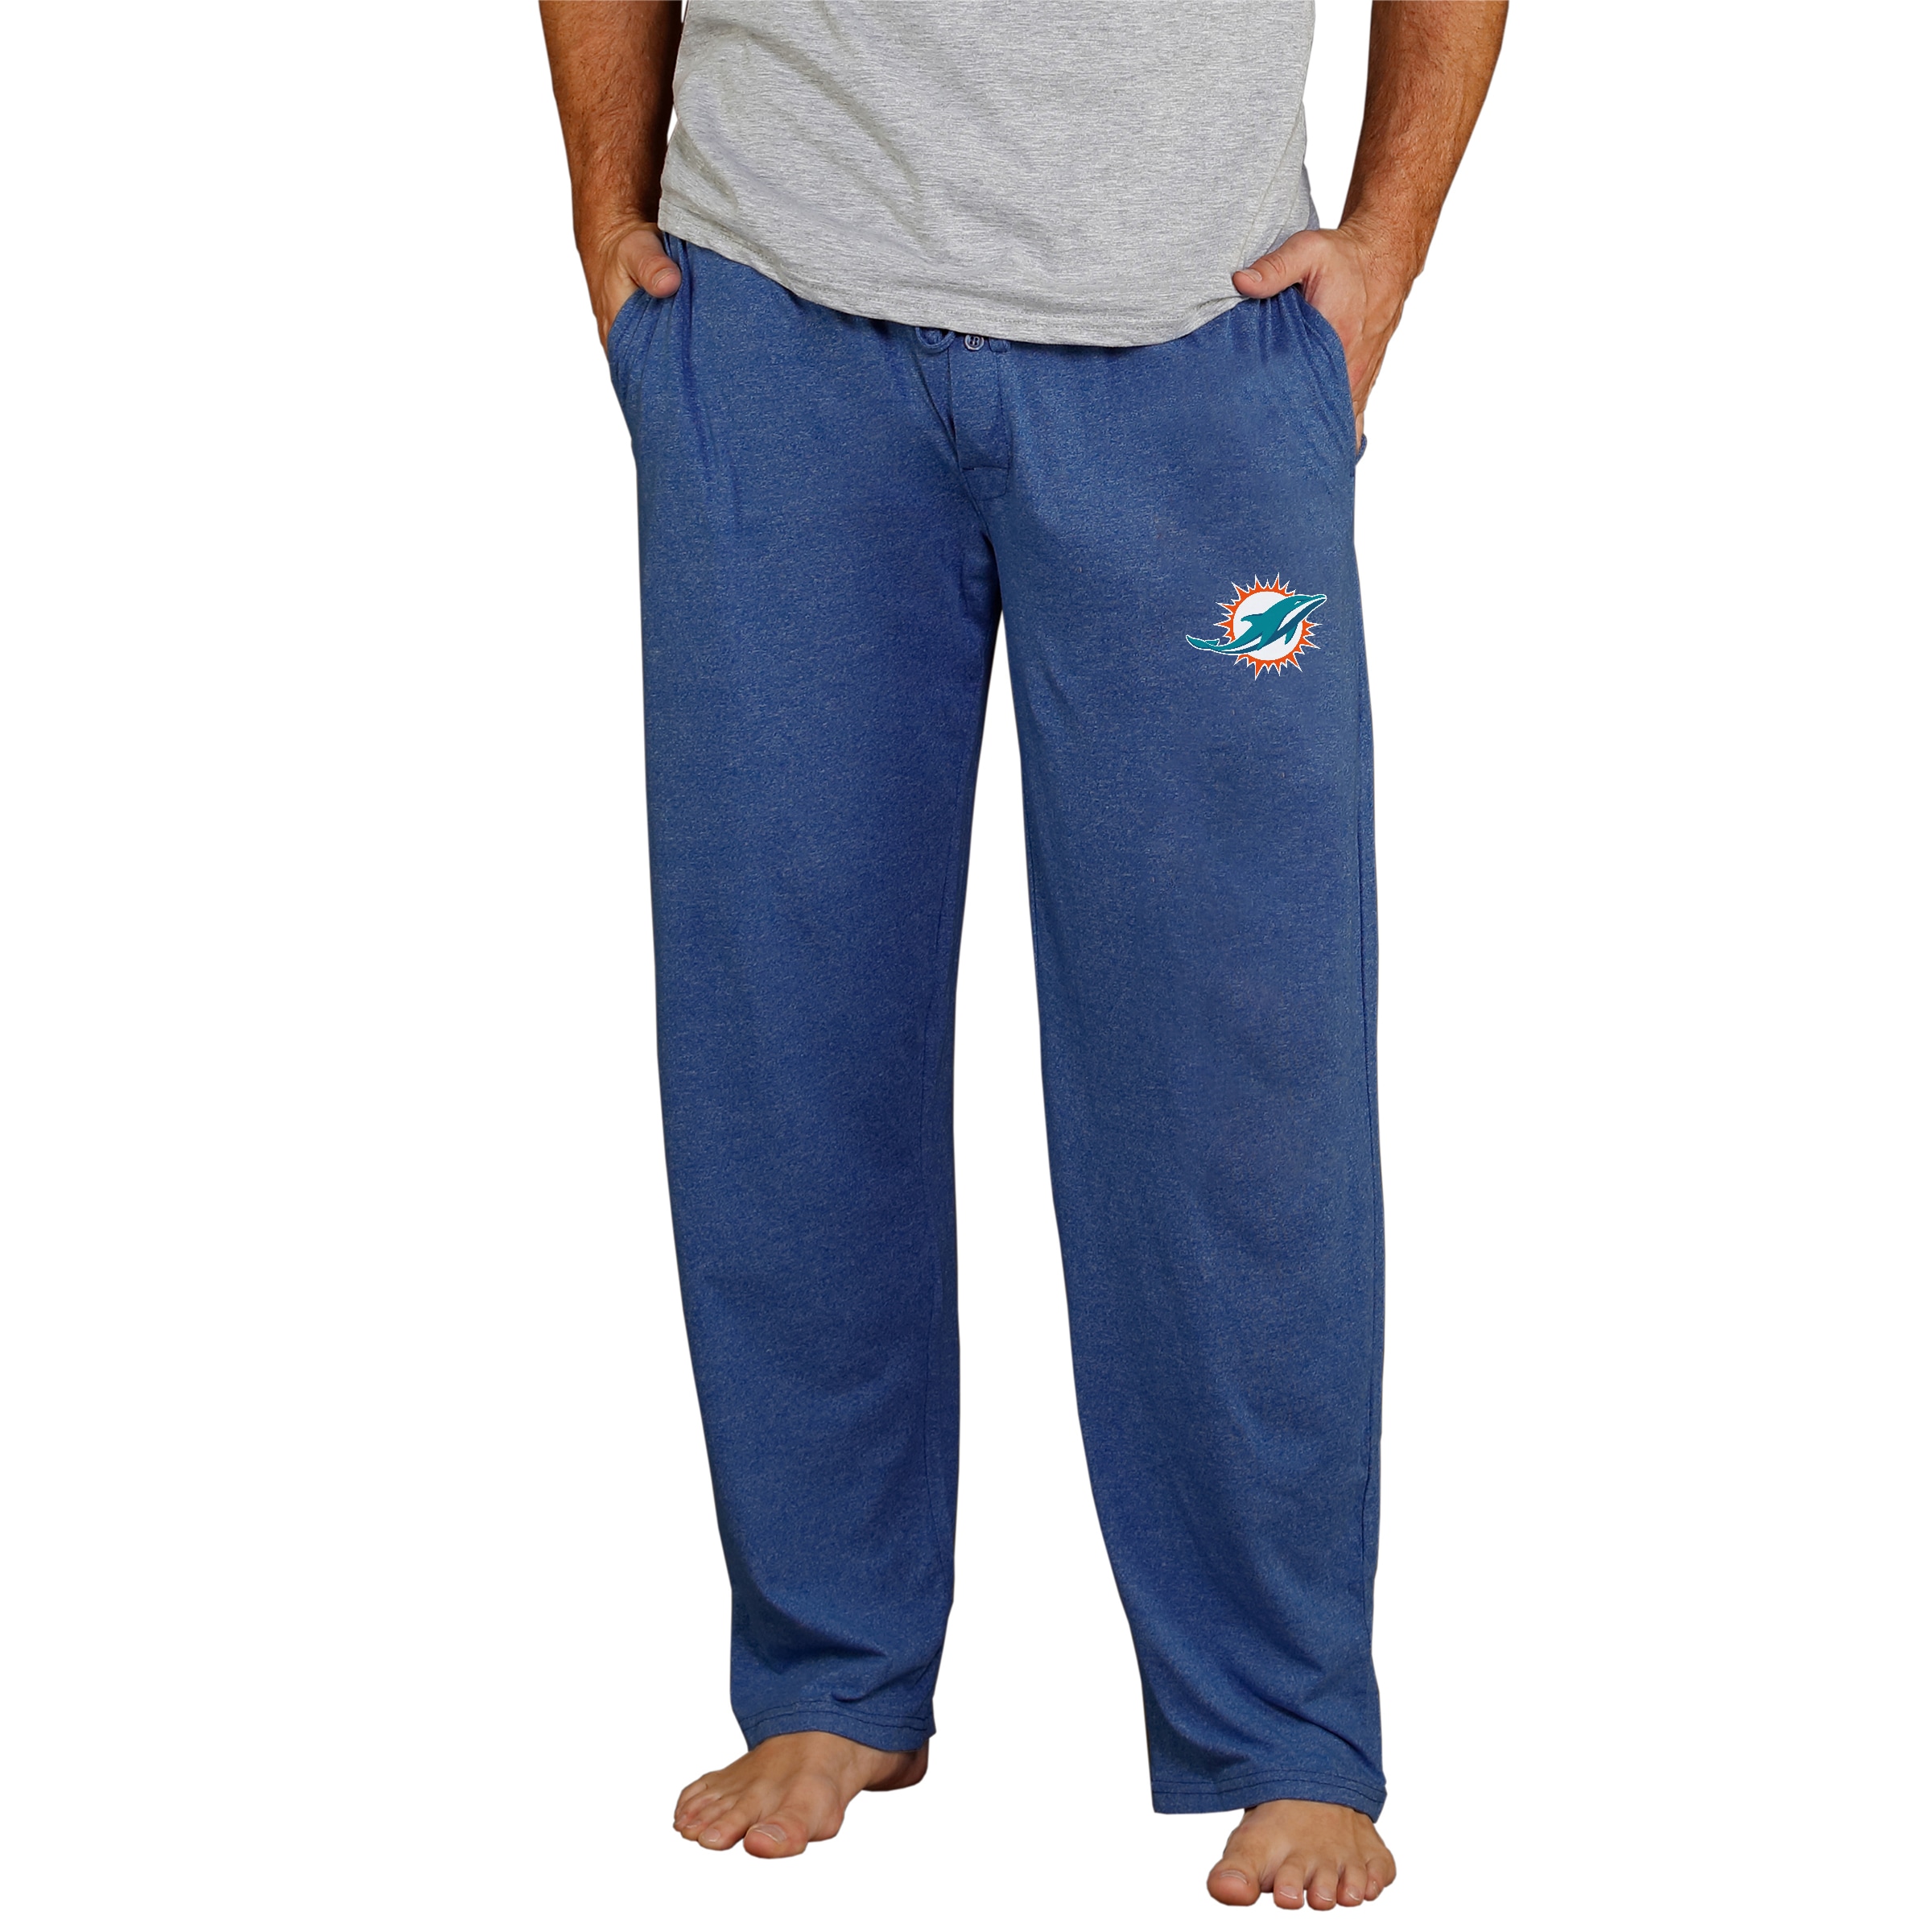 Men's Concepts Sport Navy Miami Dolphins Lightweight Quest Knit Sleep Pants - image 1 of 1